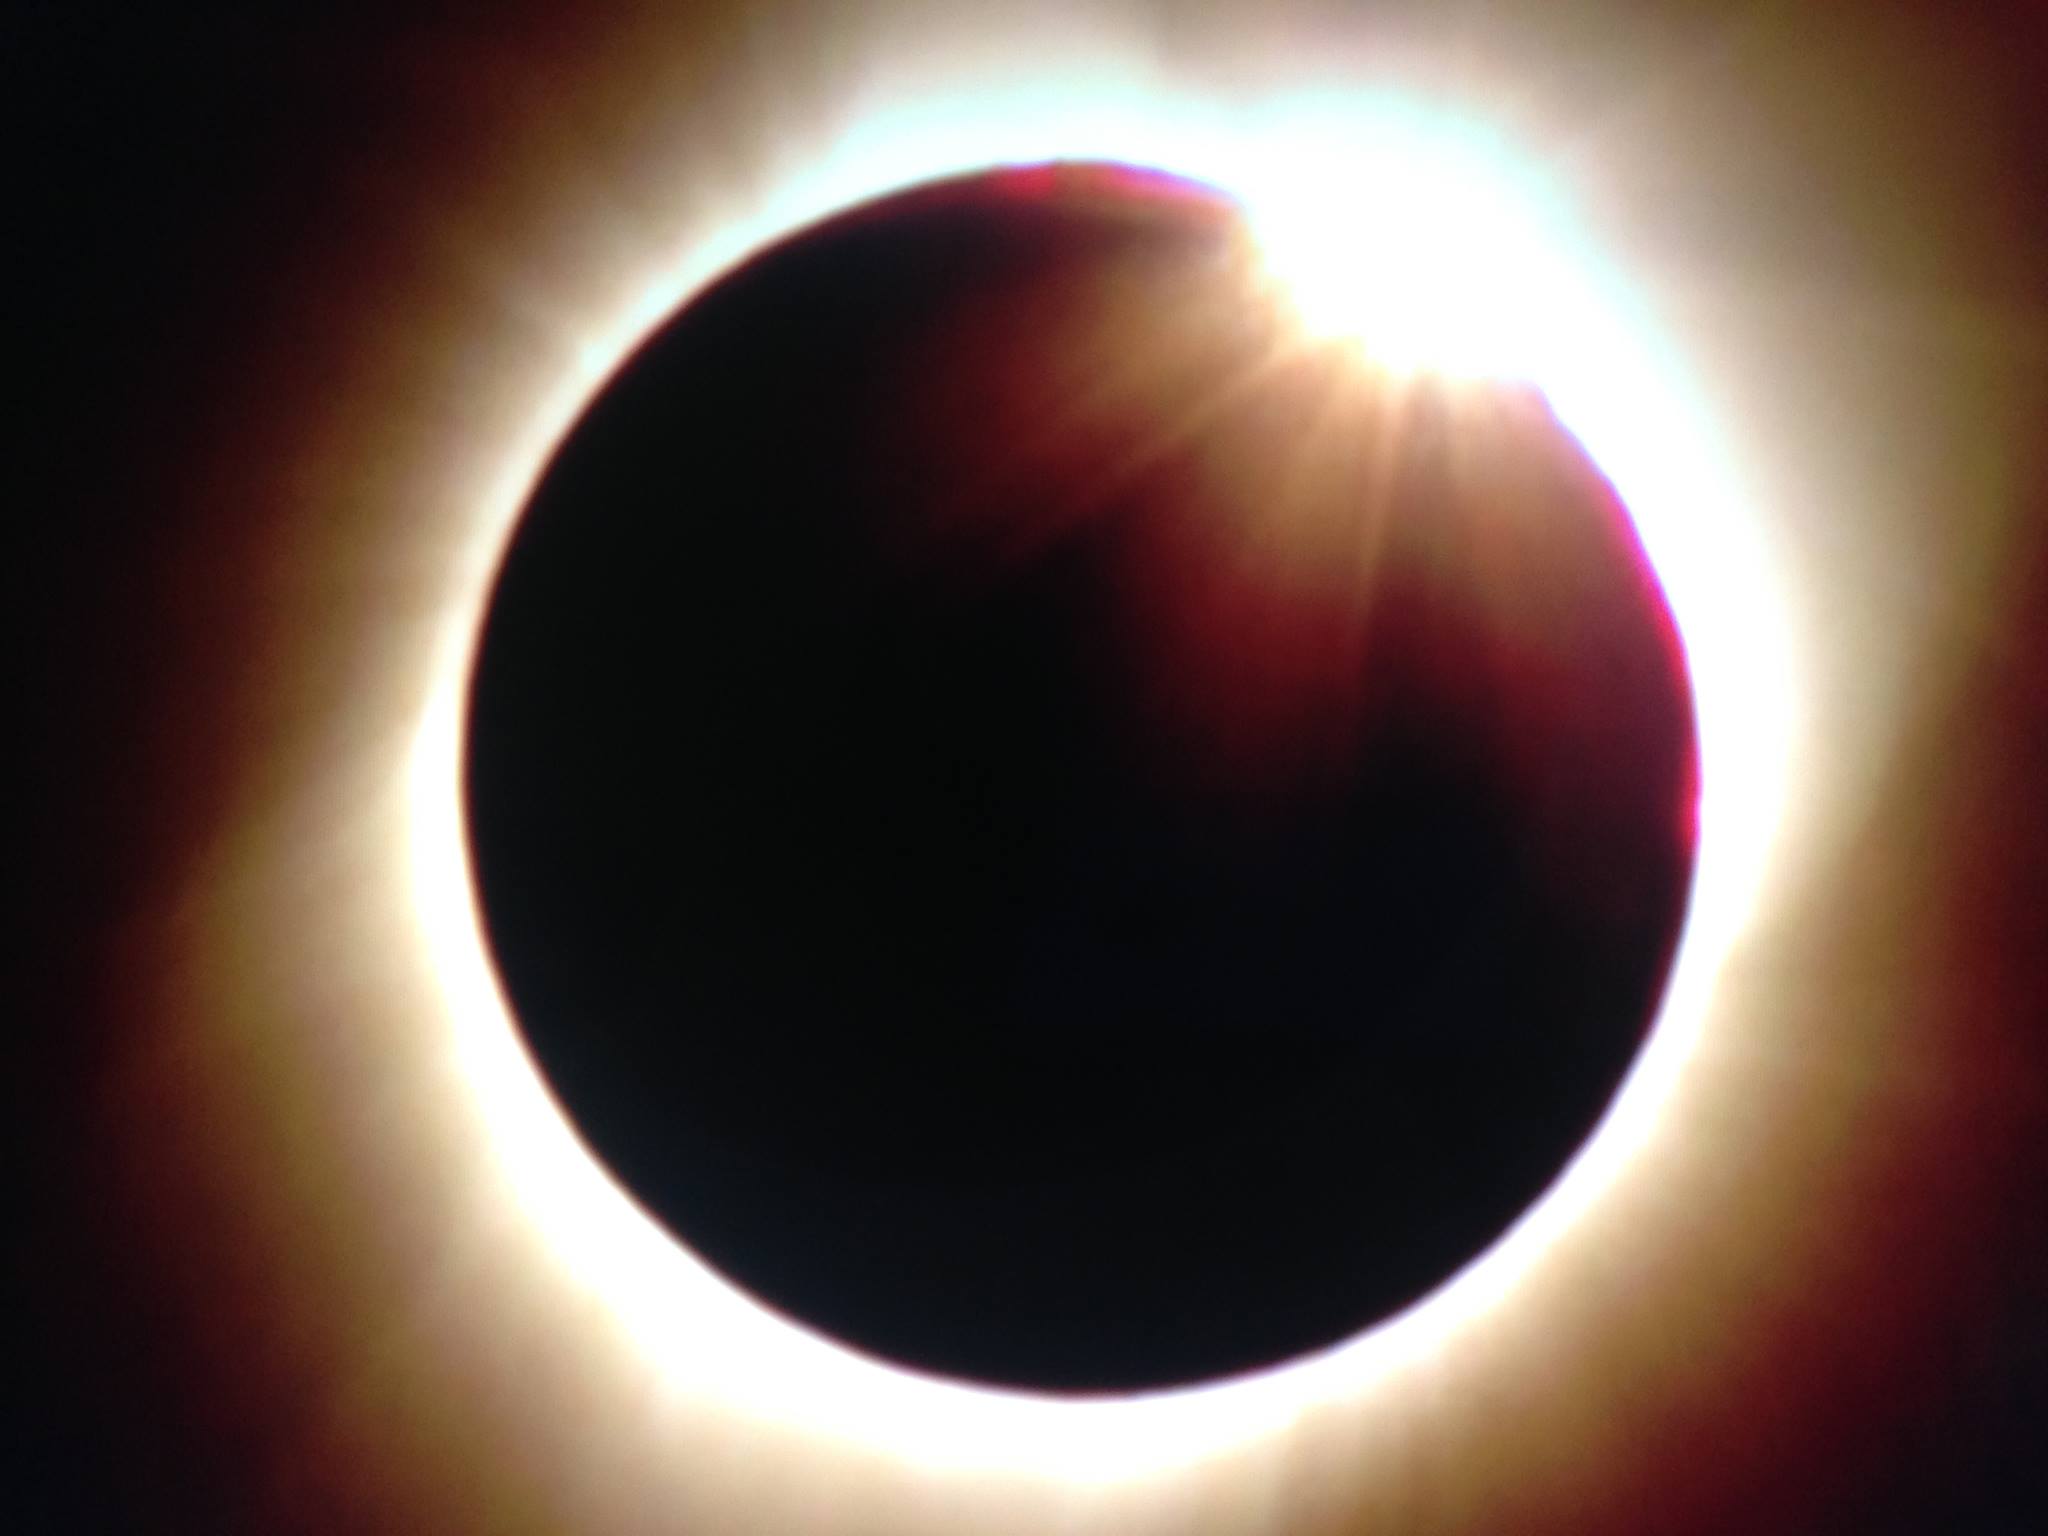 Wy American Totality 2017 Total Solar Eclipse corona From South of Douglas